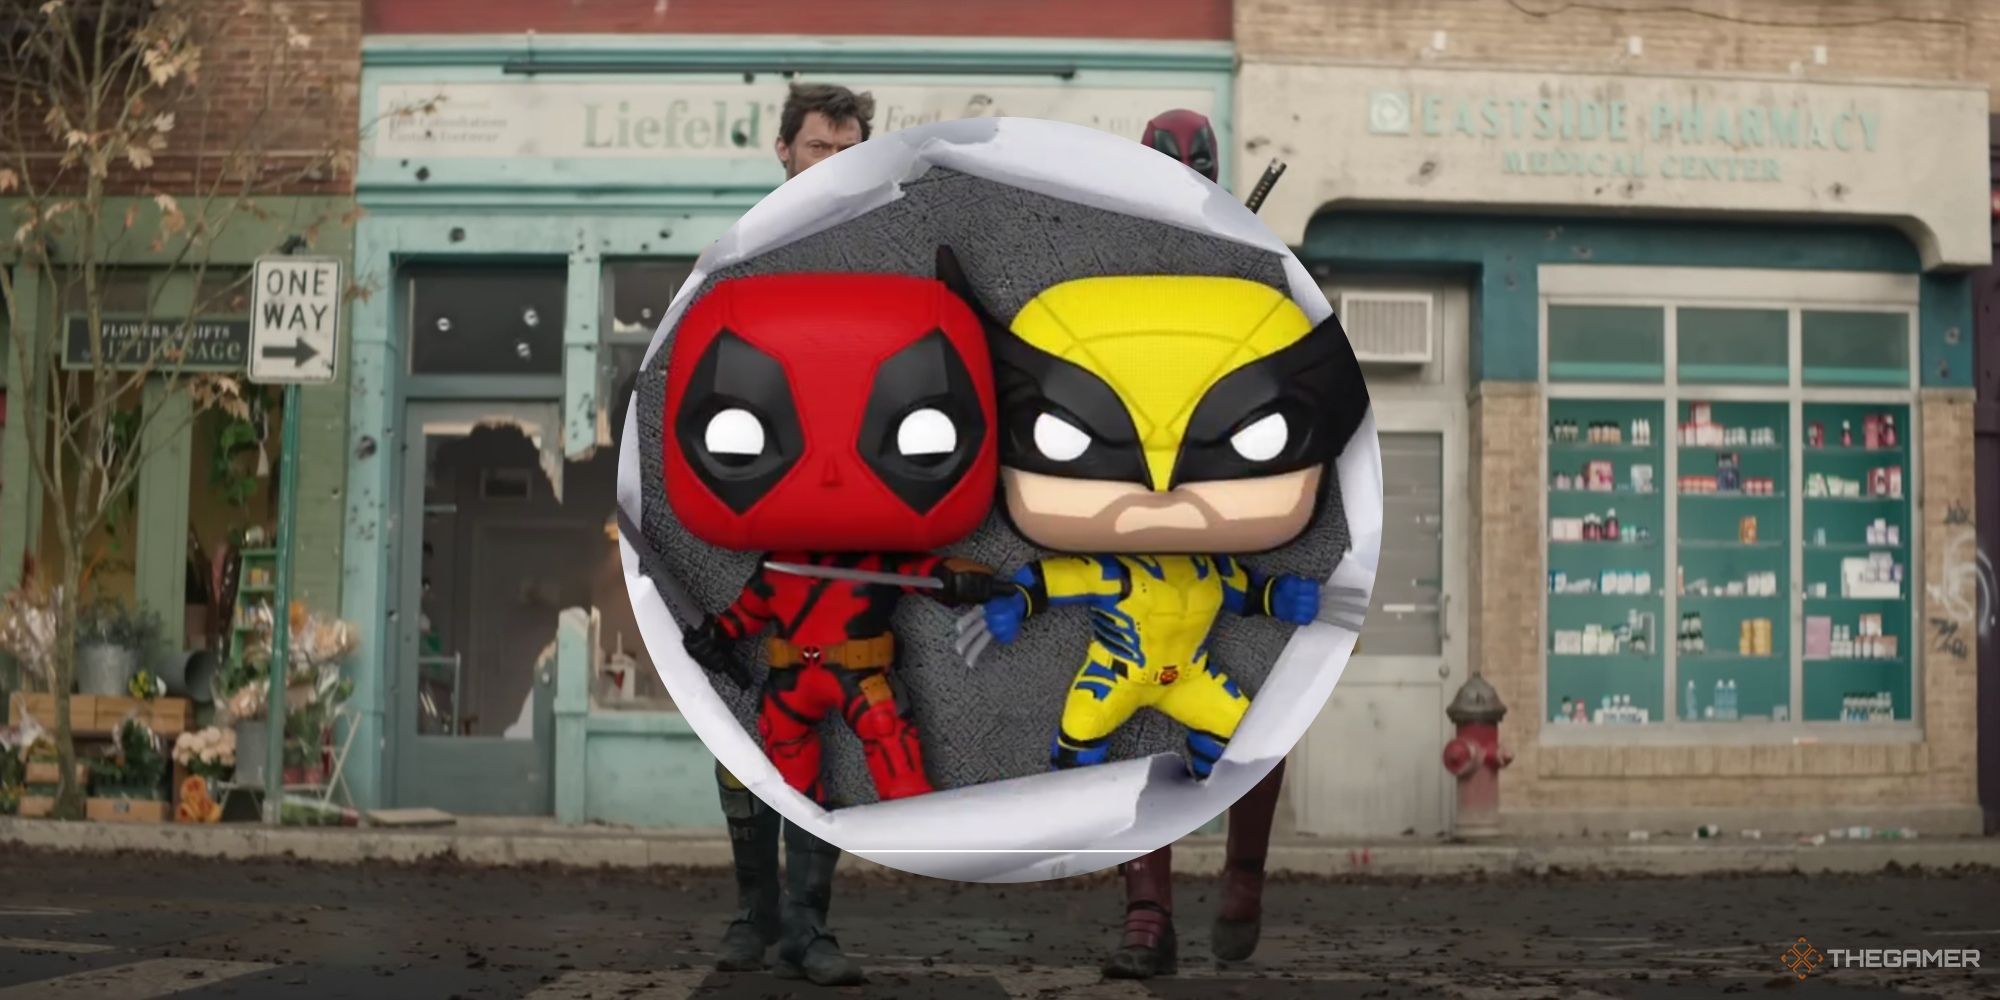 deadpool and wolverine funko pops on with real deadpool and wolverine behind them